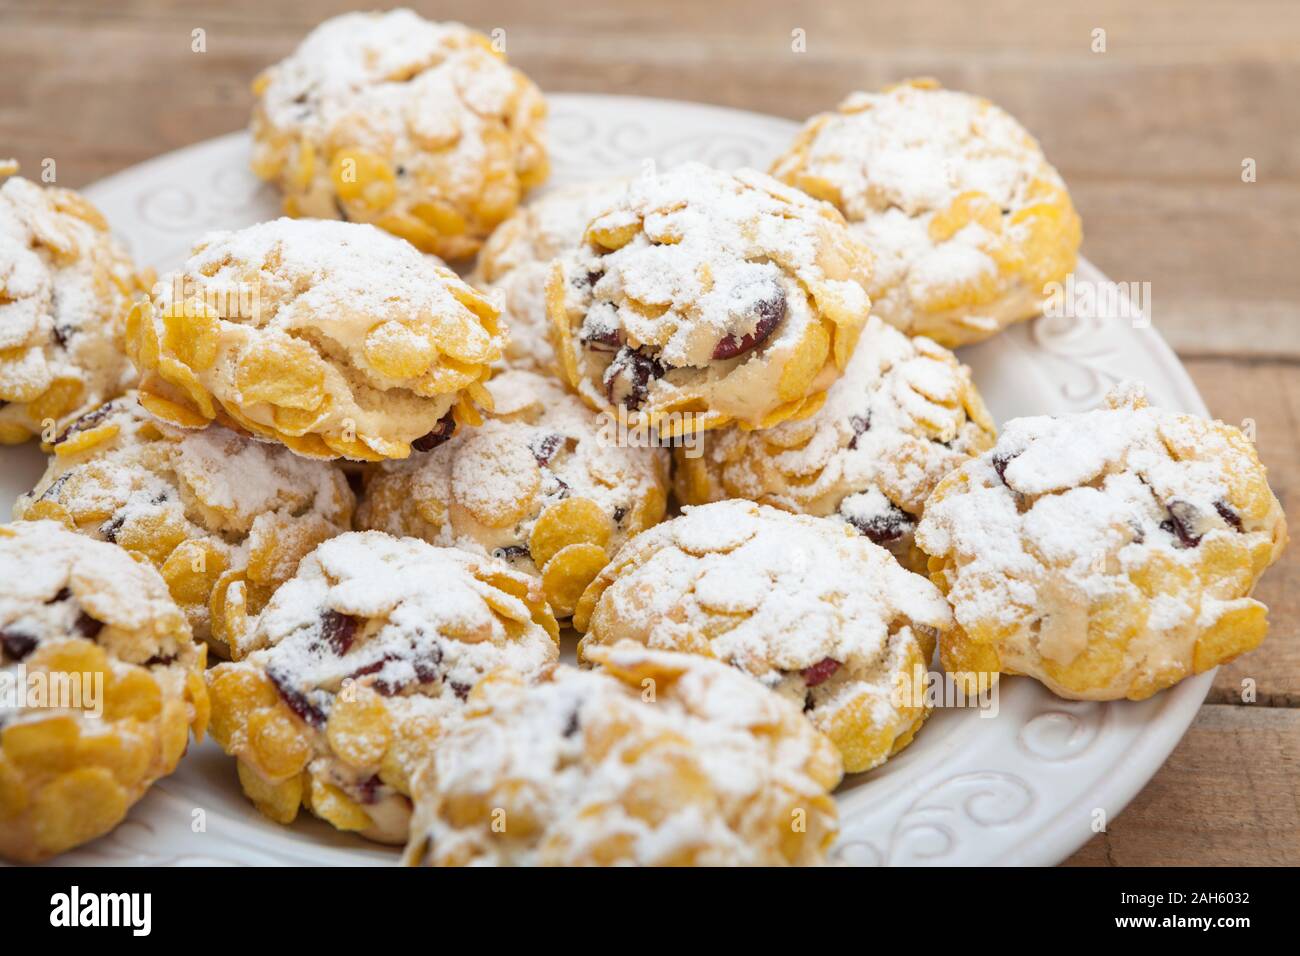 Corn flake cereal cookie Stock Photo